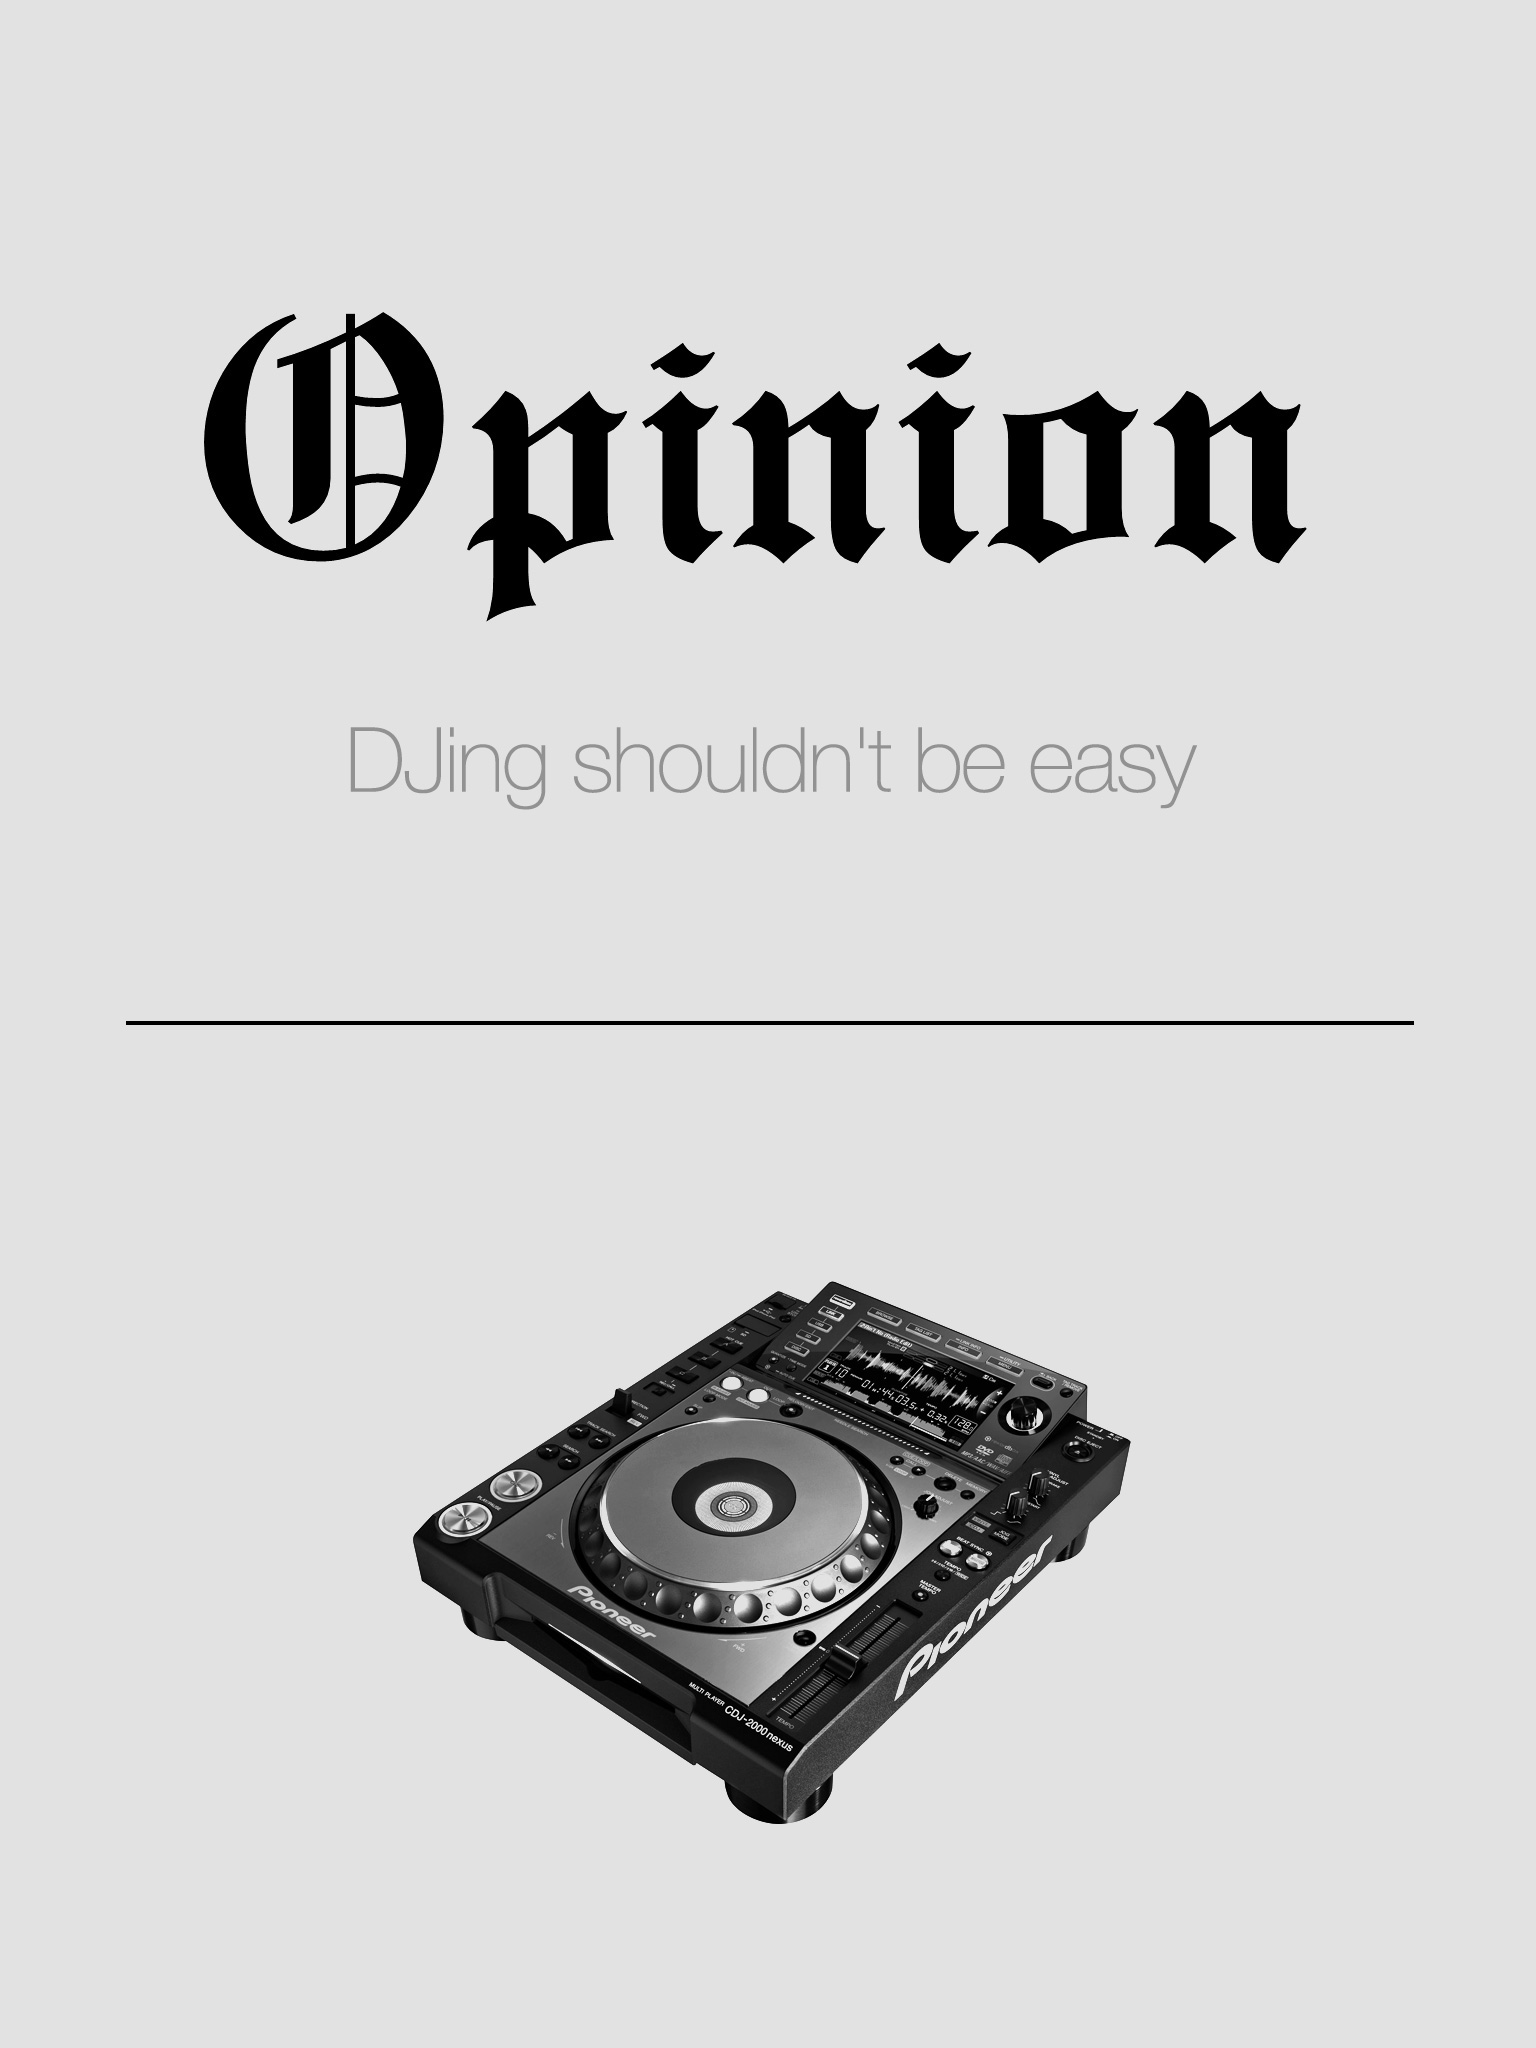 Opinion: DJing shouldn't be easy